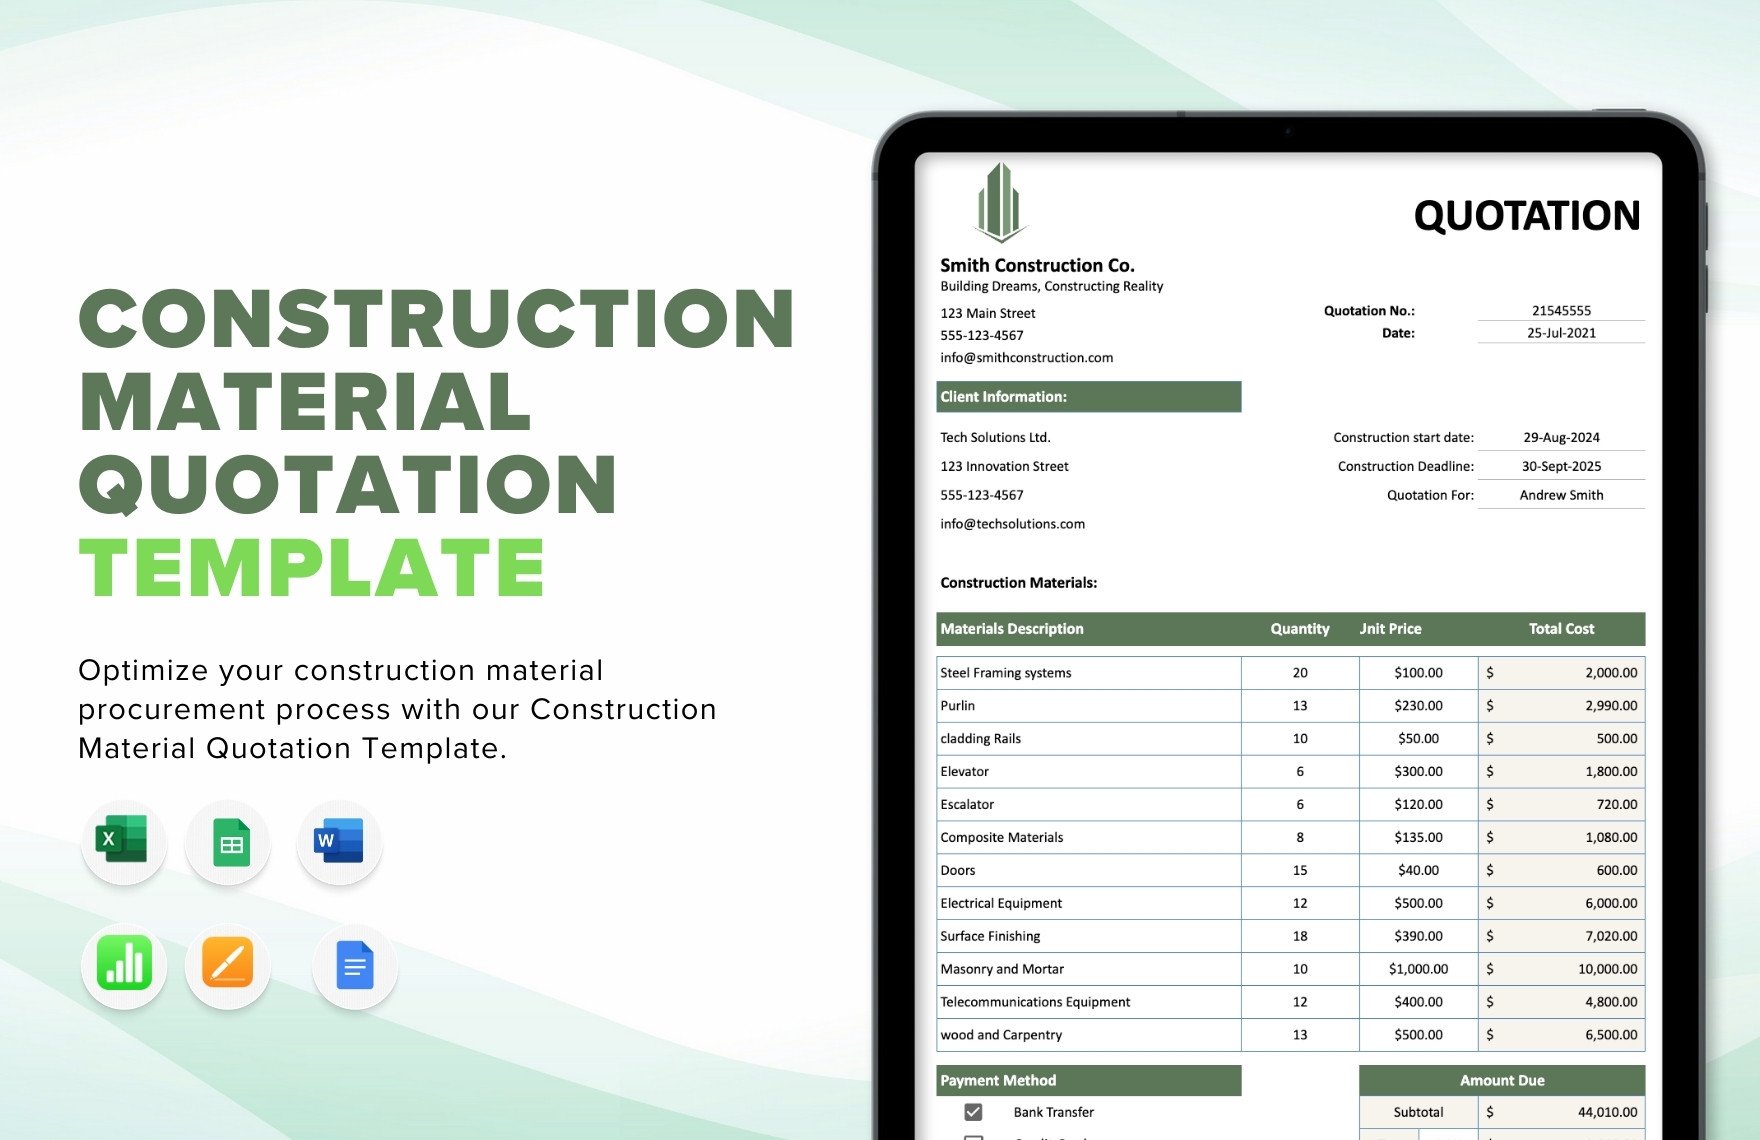 Construction Material Quotation Template